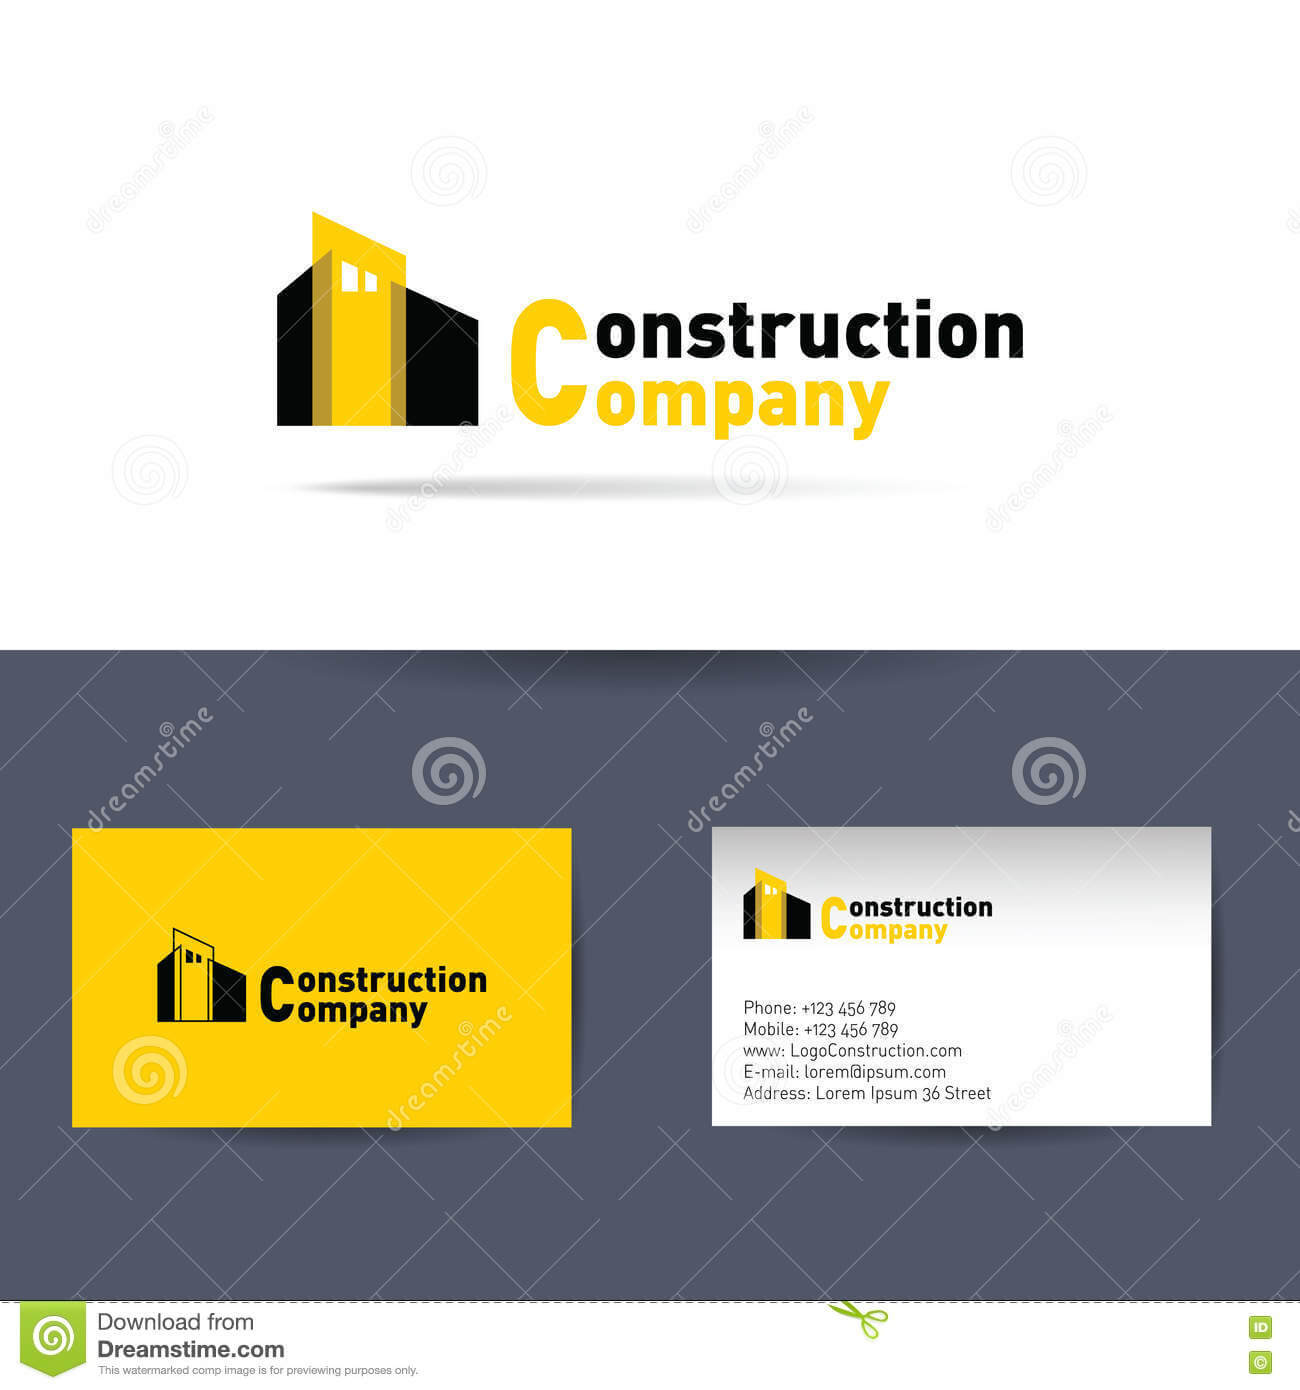 Construction Business Cards Template - Logo Design Ideas For Construction Business Card Templates Download Free